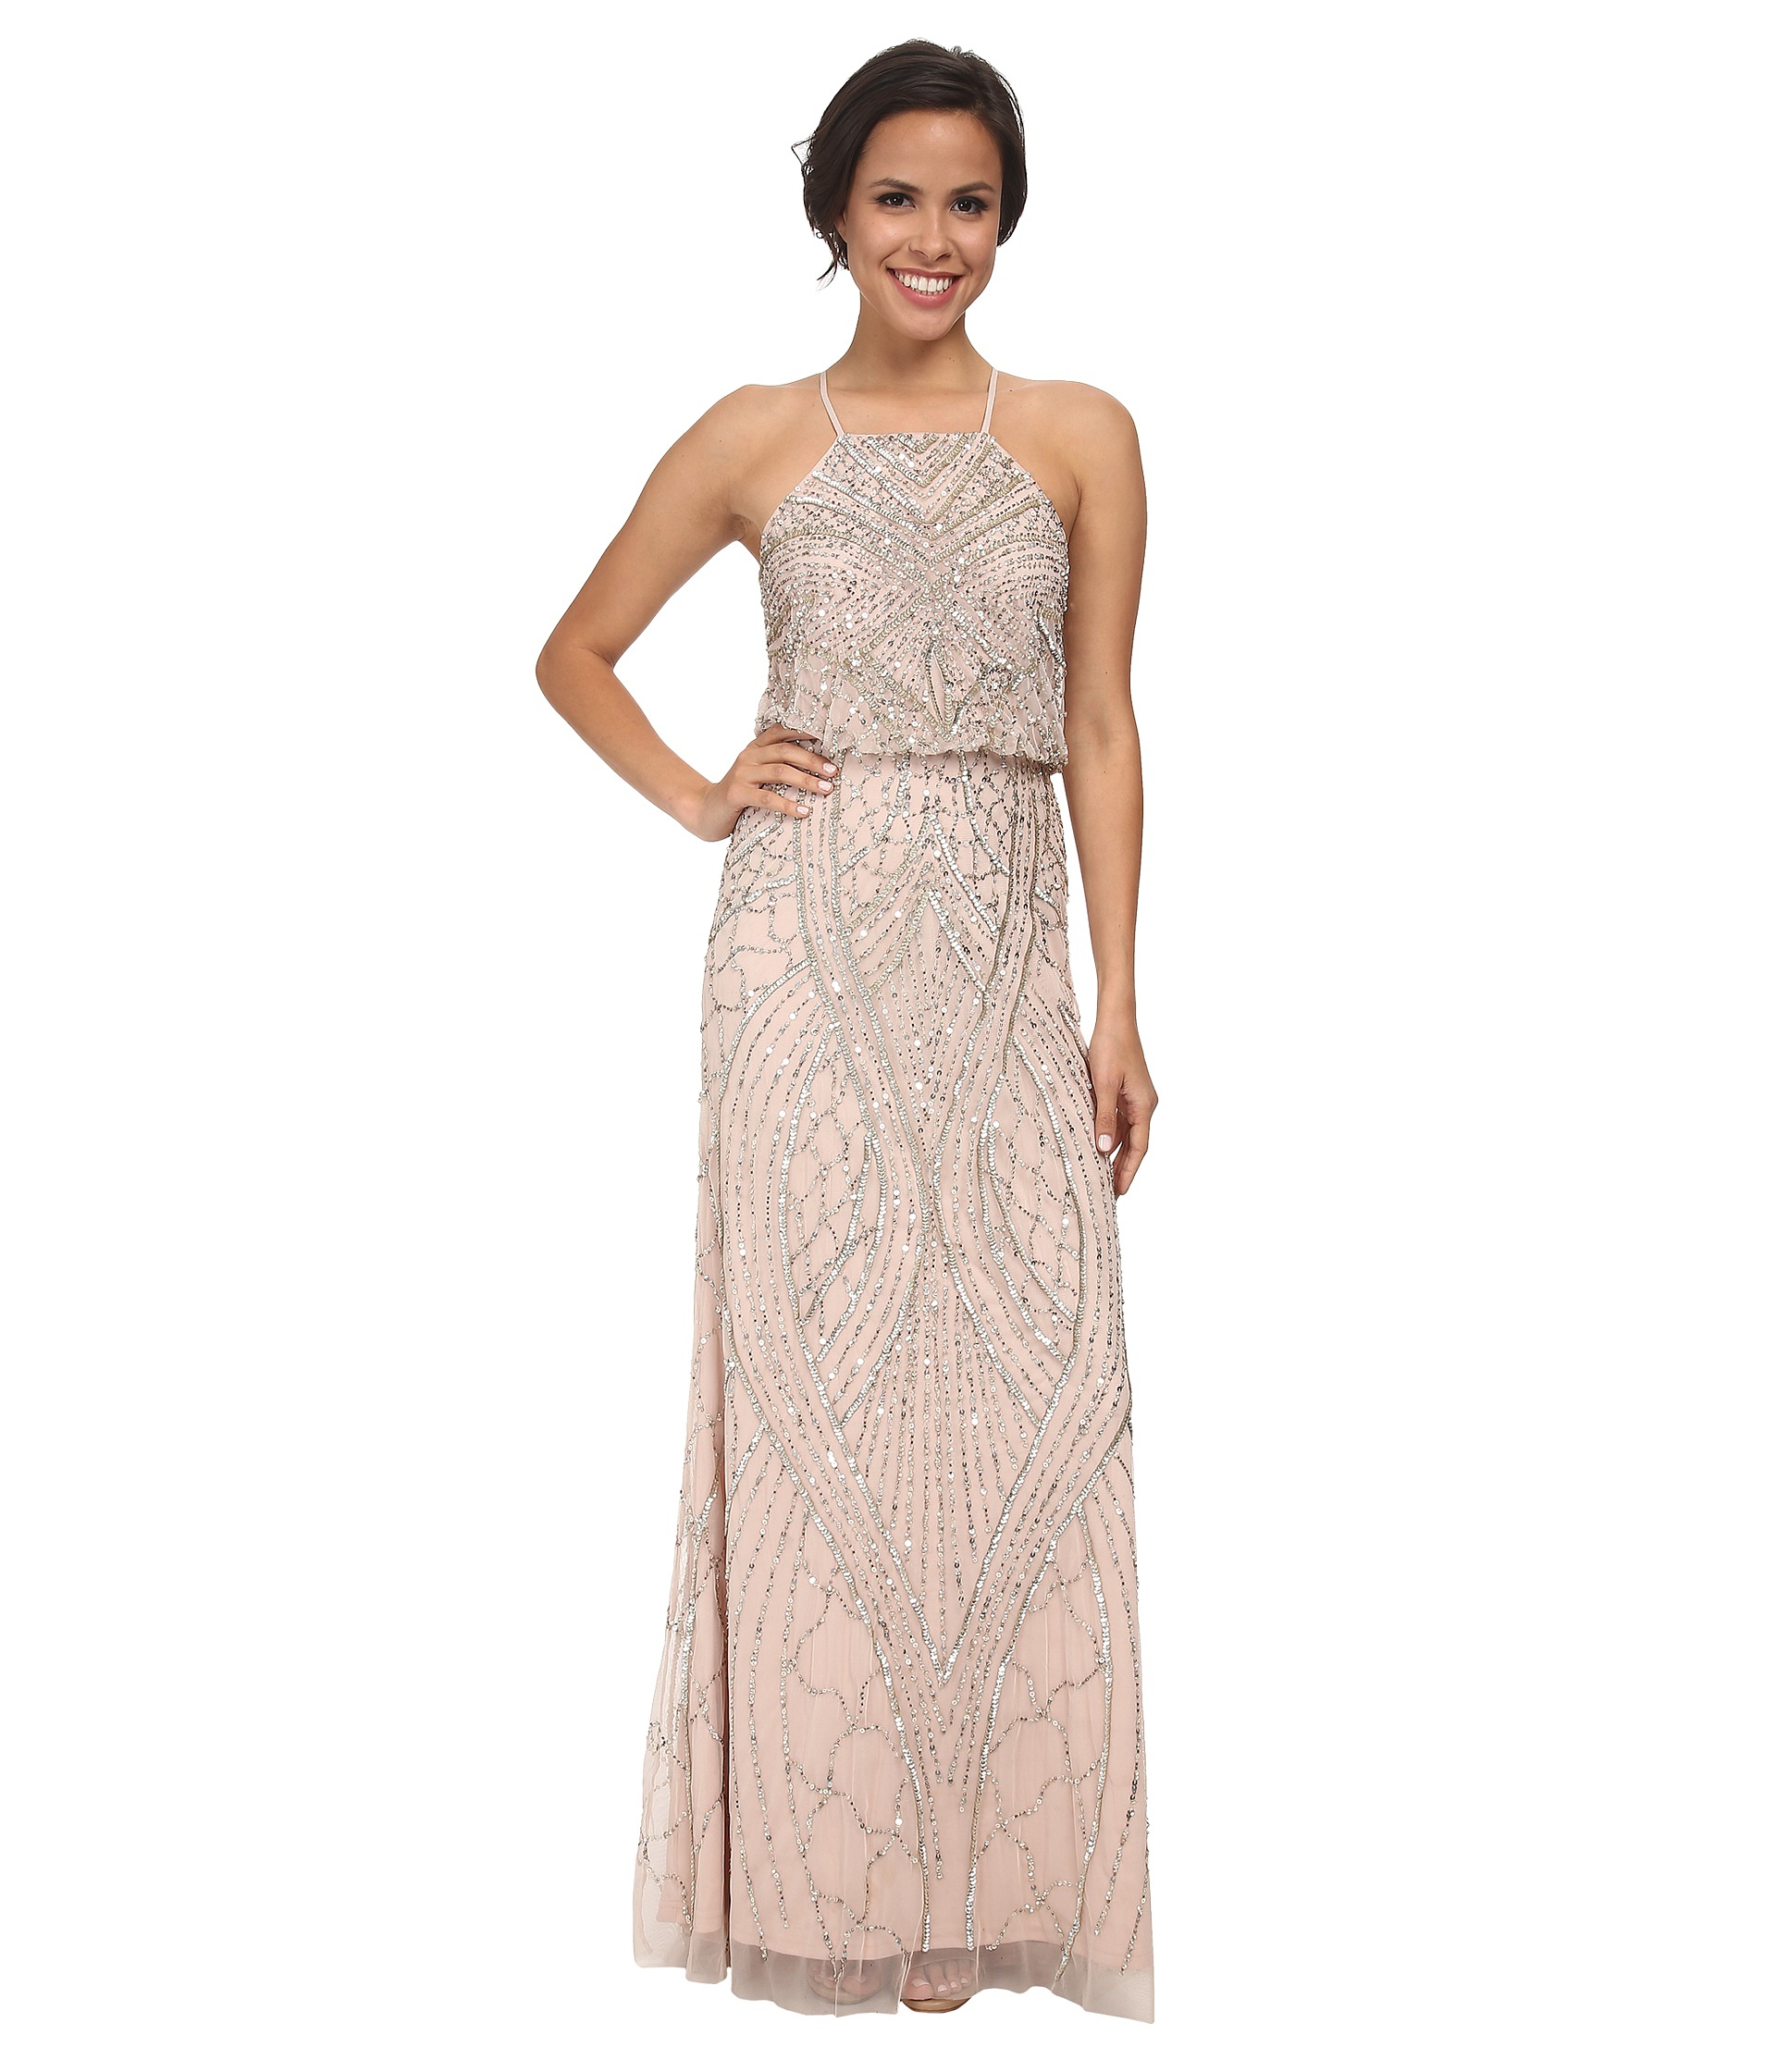 Adrianna Papell Halter Fully Beaded Gown in Shell (Pink) - Lyst